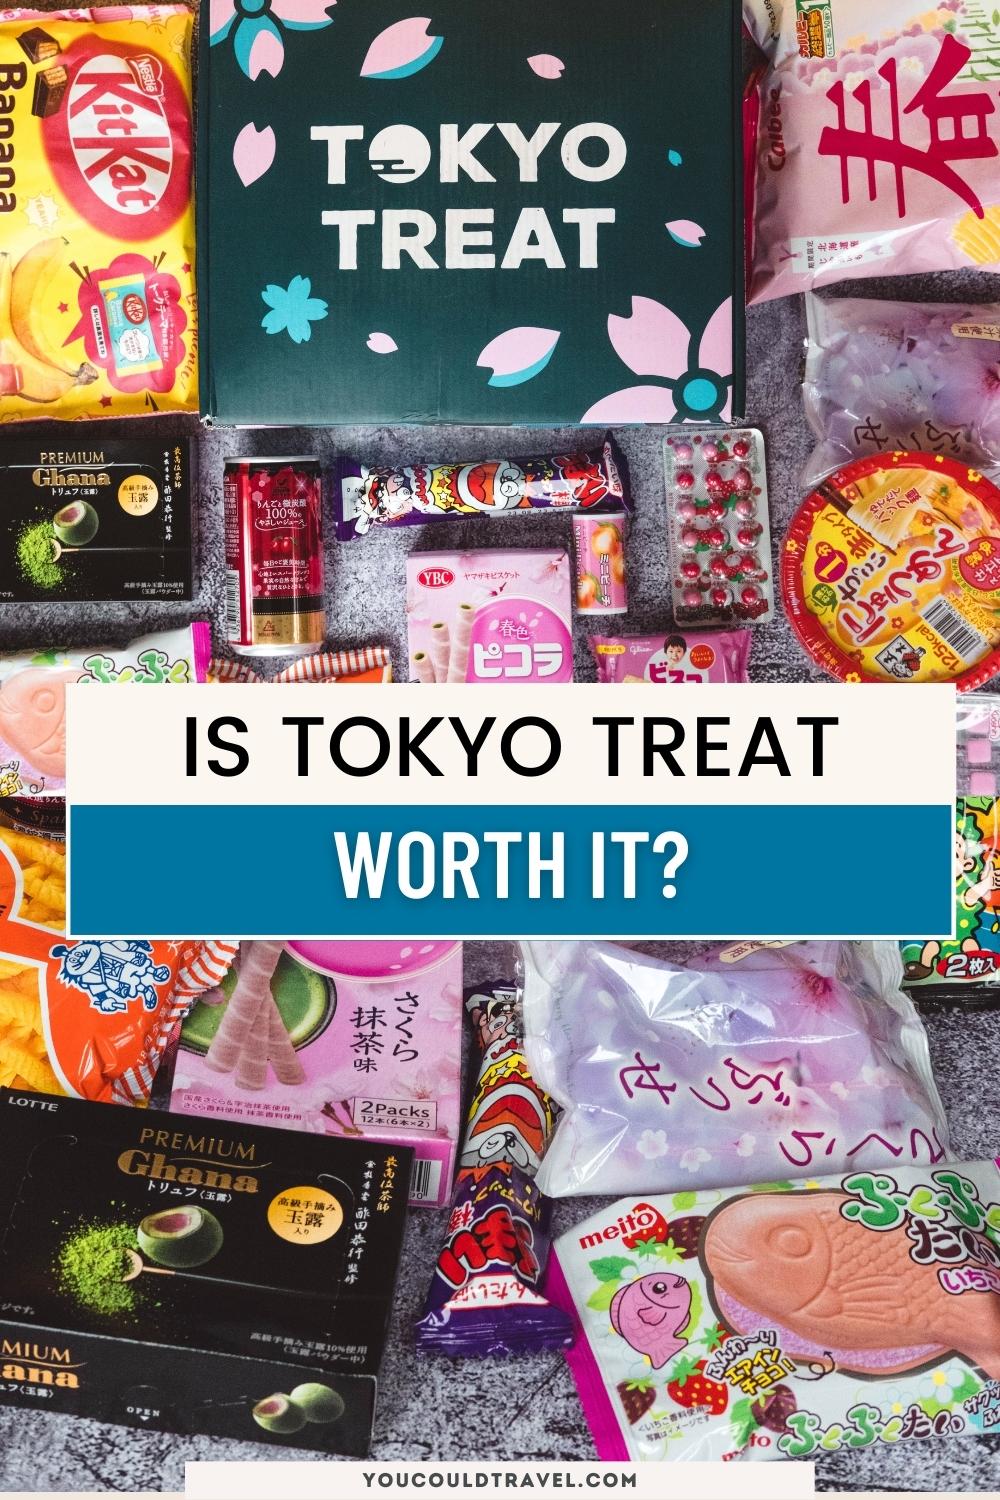 The Tokyo Treat box review